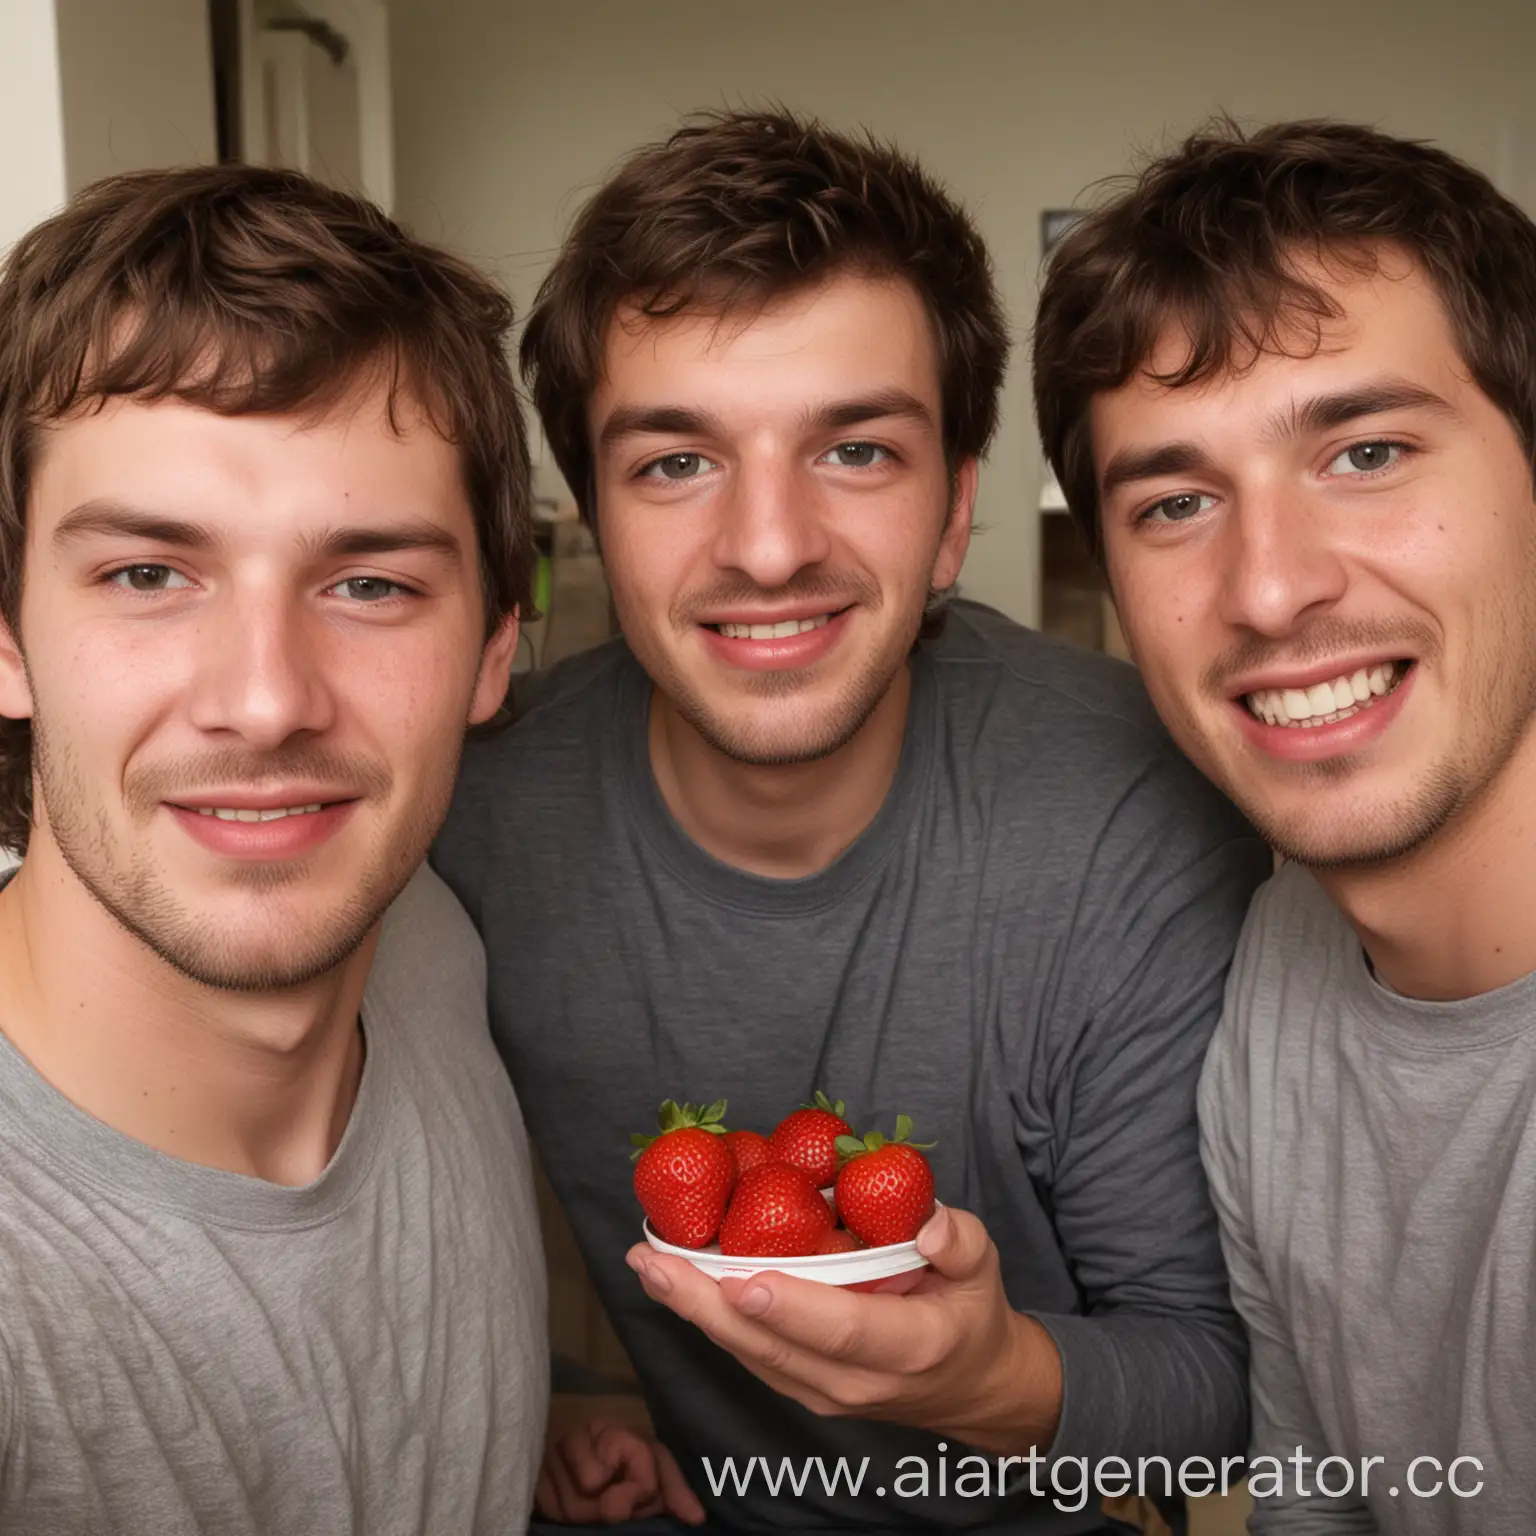 Man-with-StrawberryChoked-Roommates-in-Cozy-Apartment-Setting